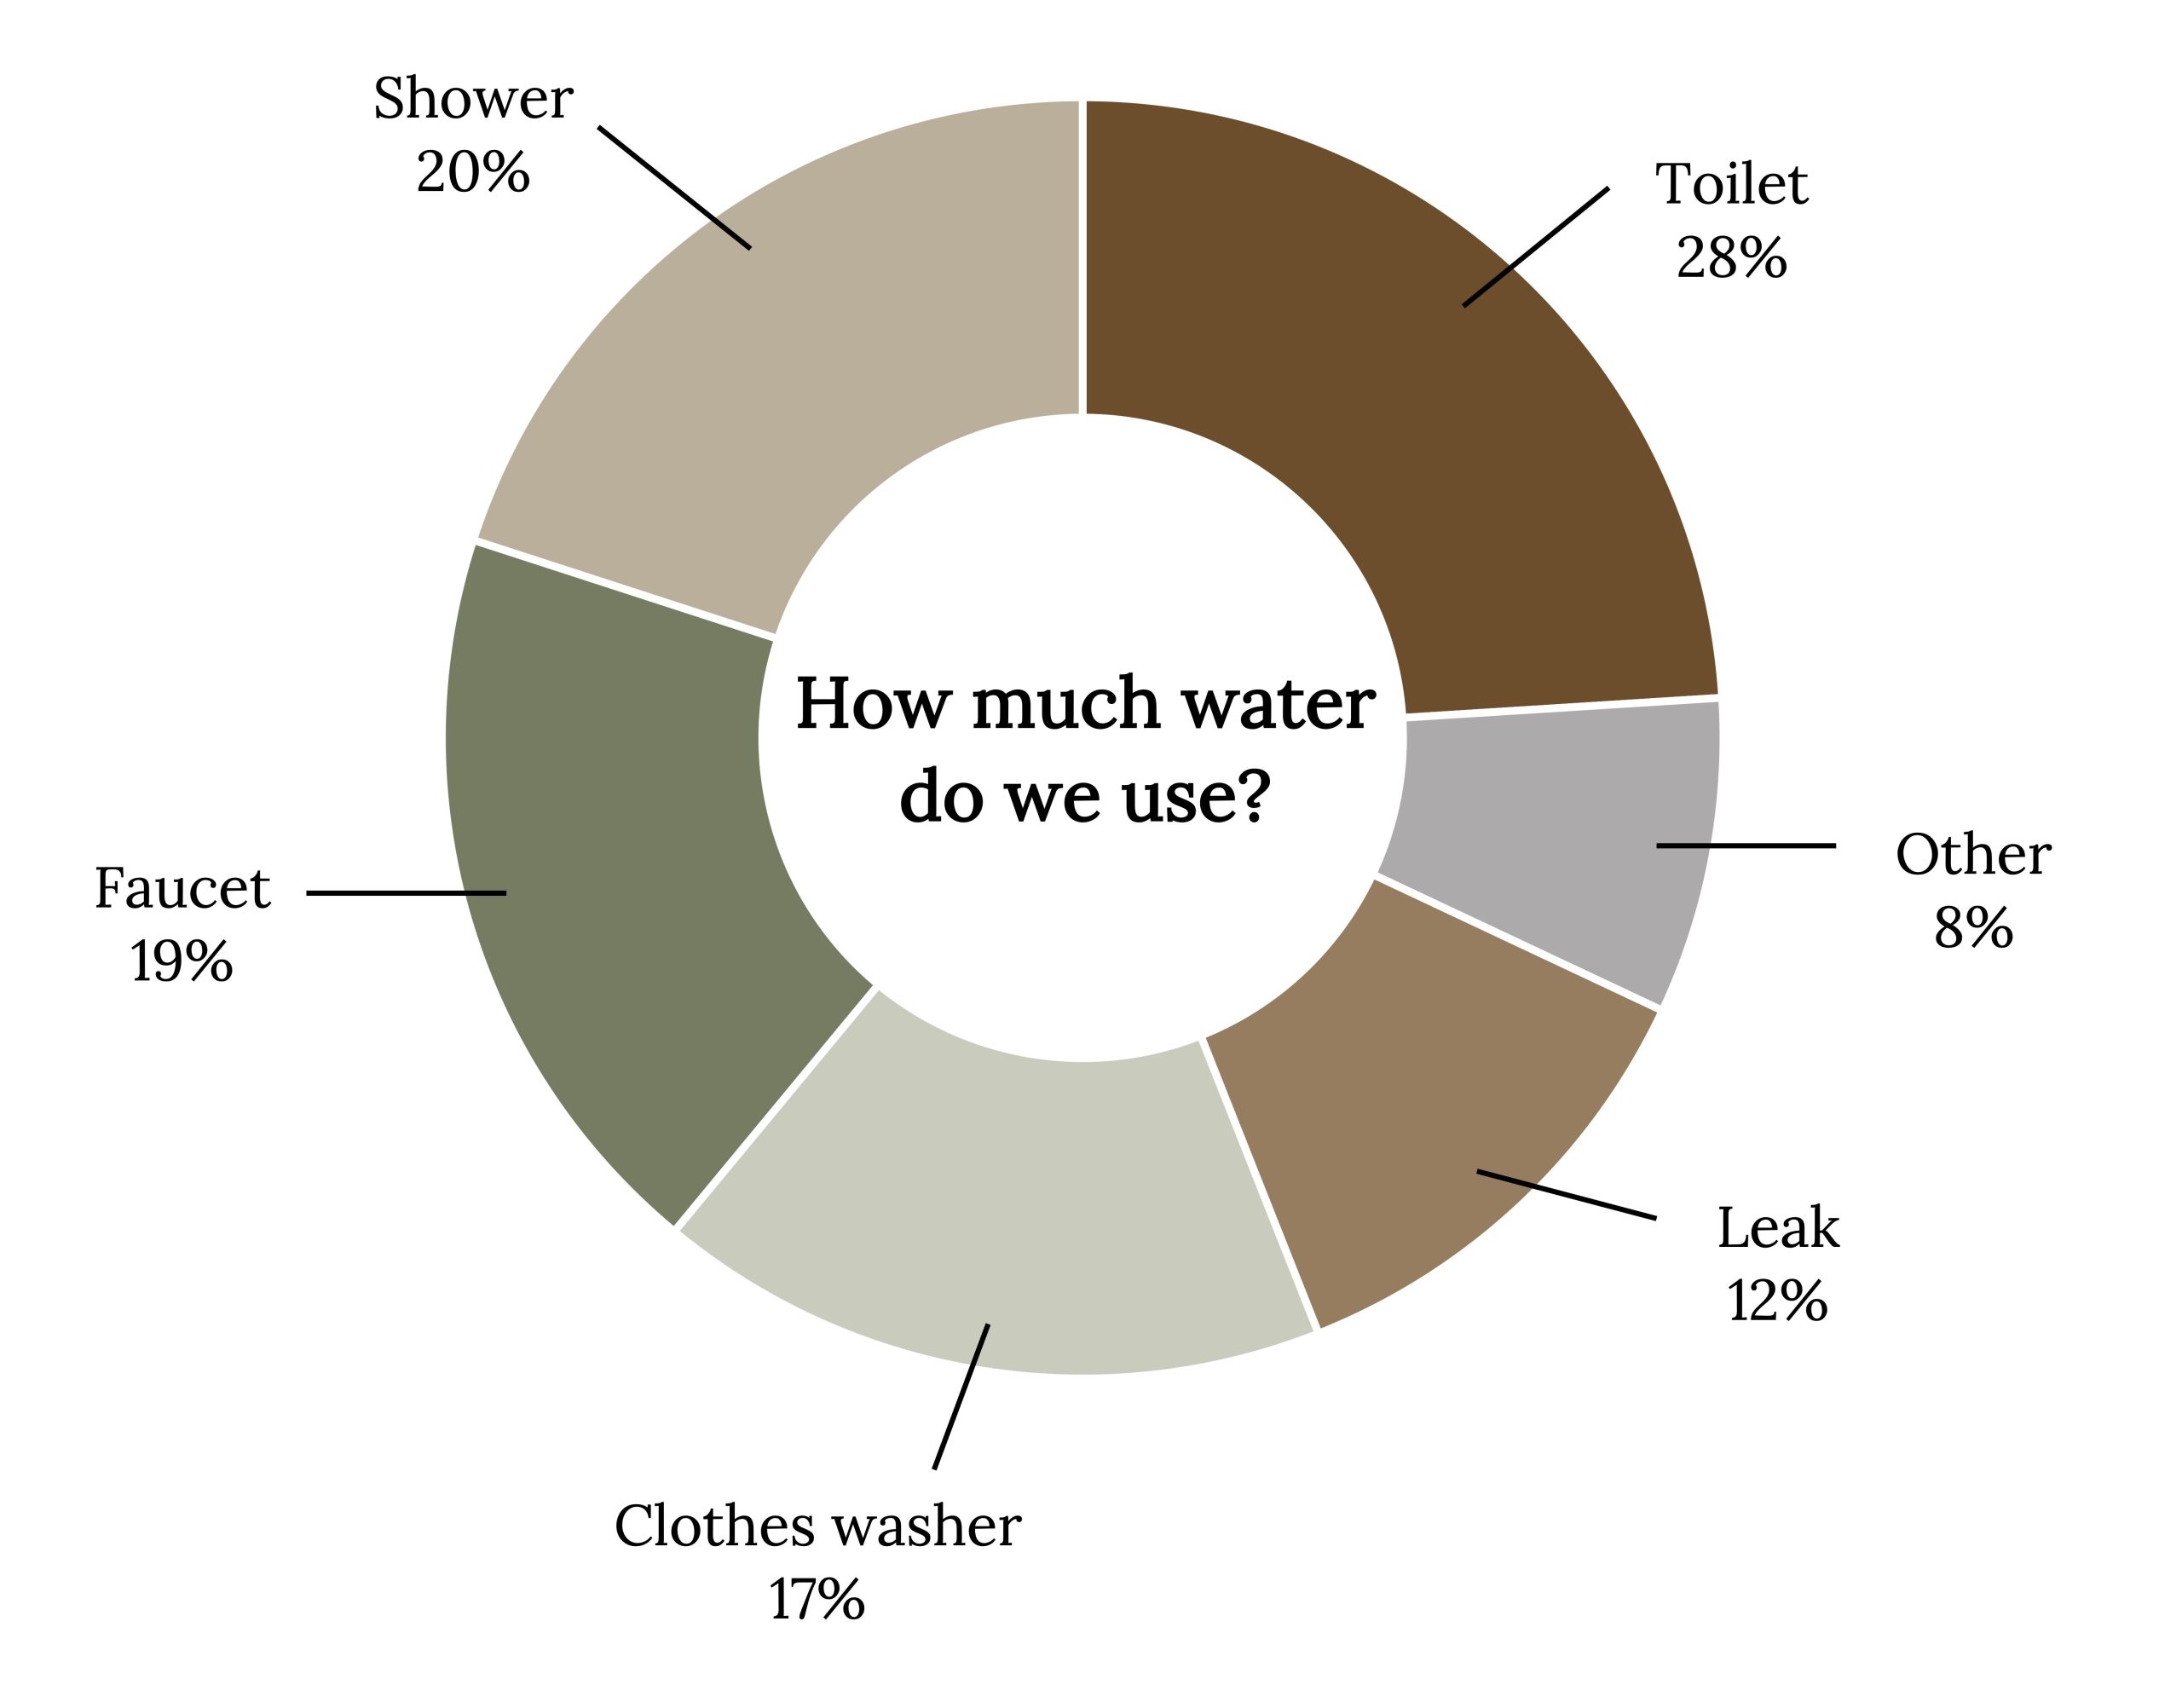 How much water do we use? Pie chart. Toilet: 28%, leak: 12%, clothes washer: 17%, faucet: 19%, shower: 20%, other: 8%.